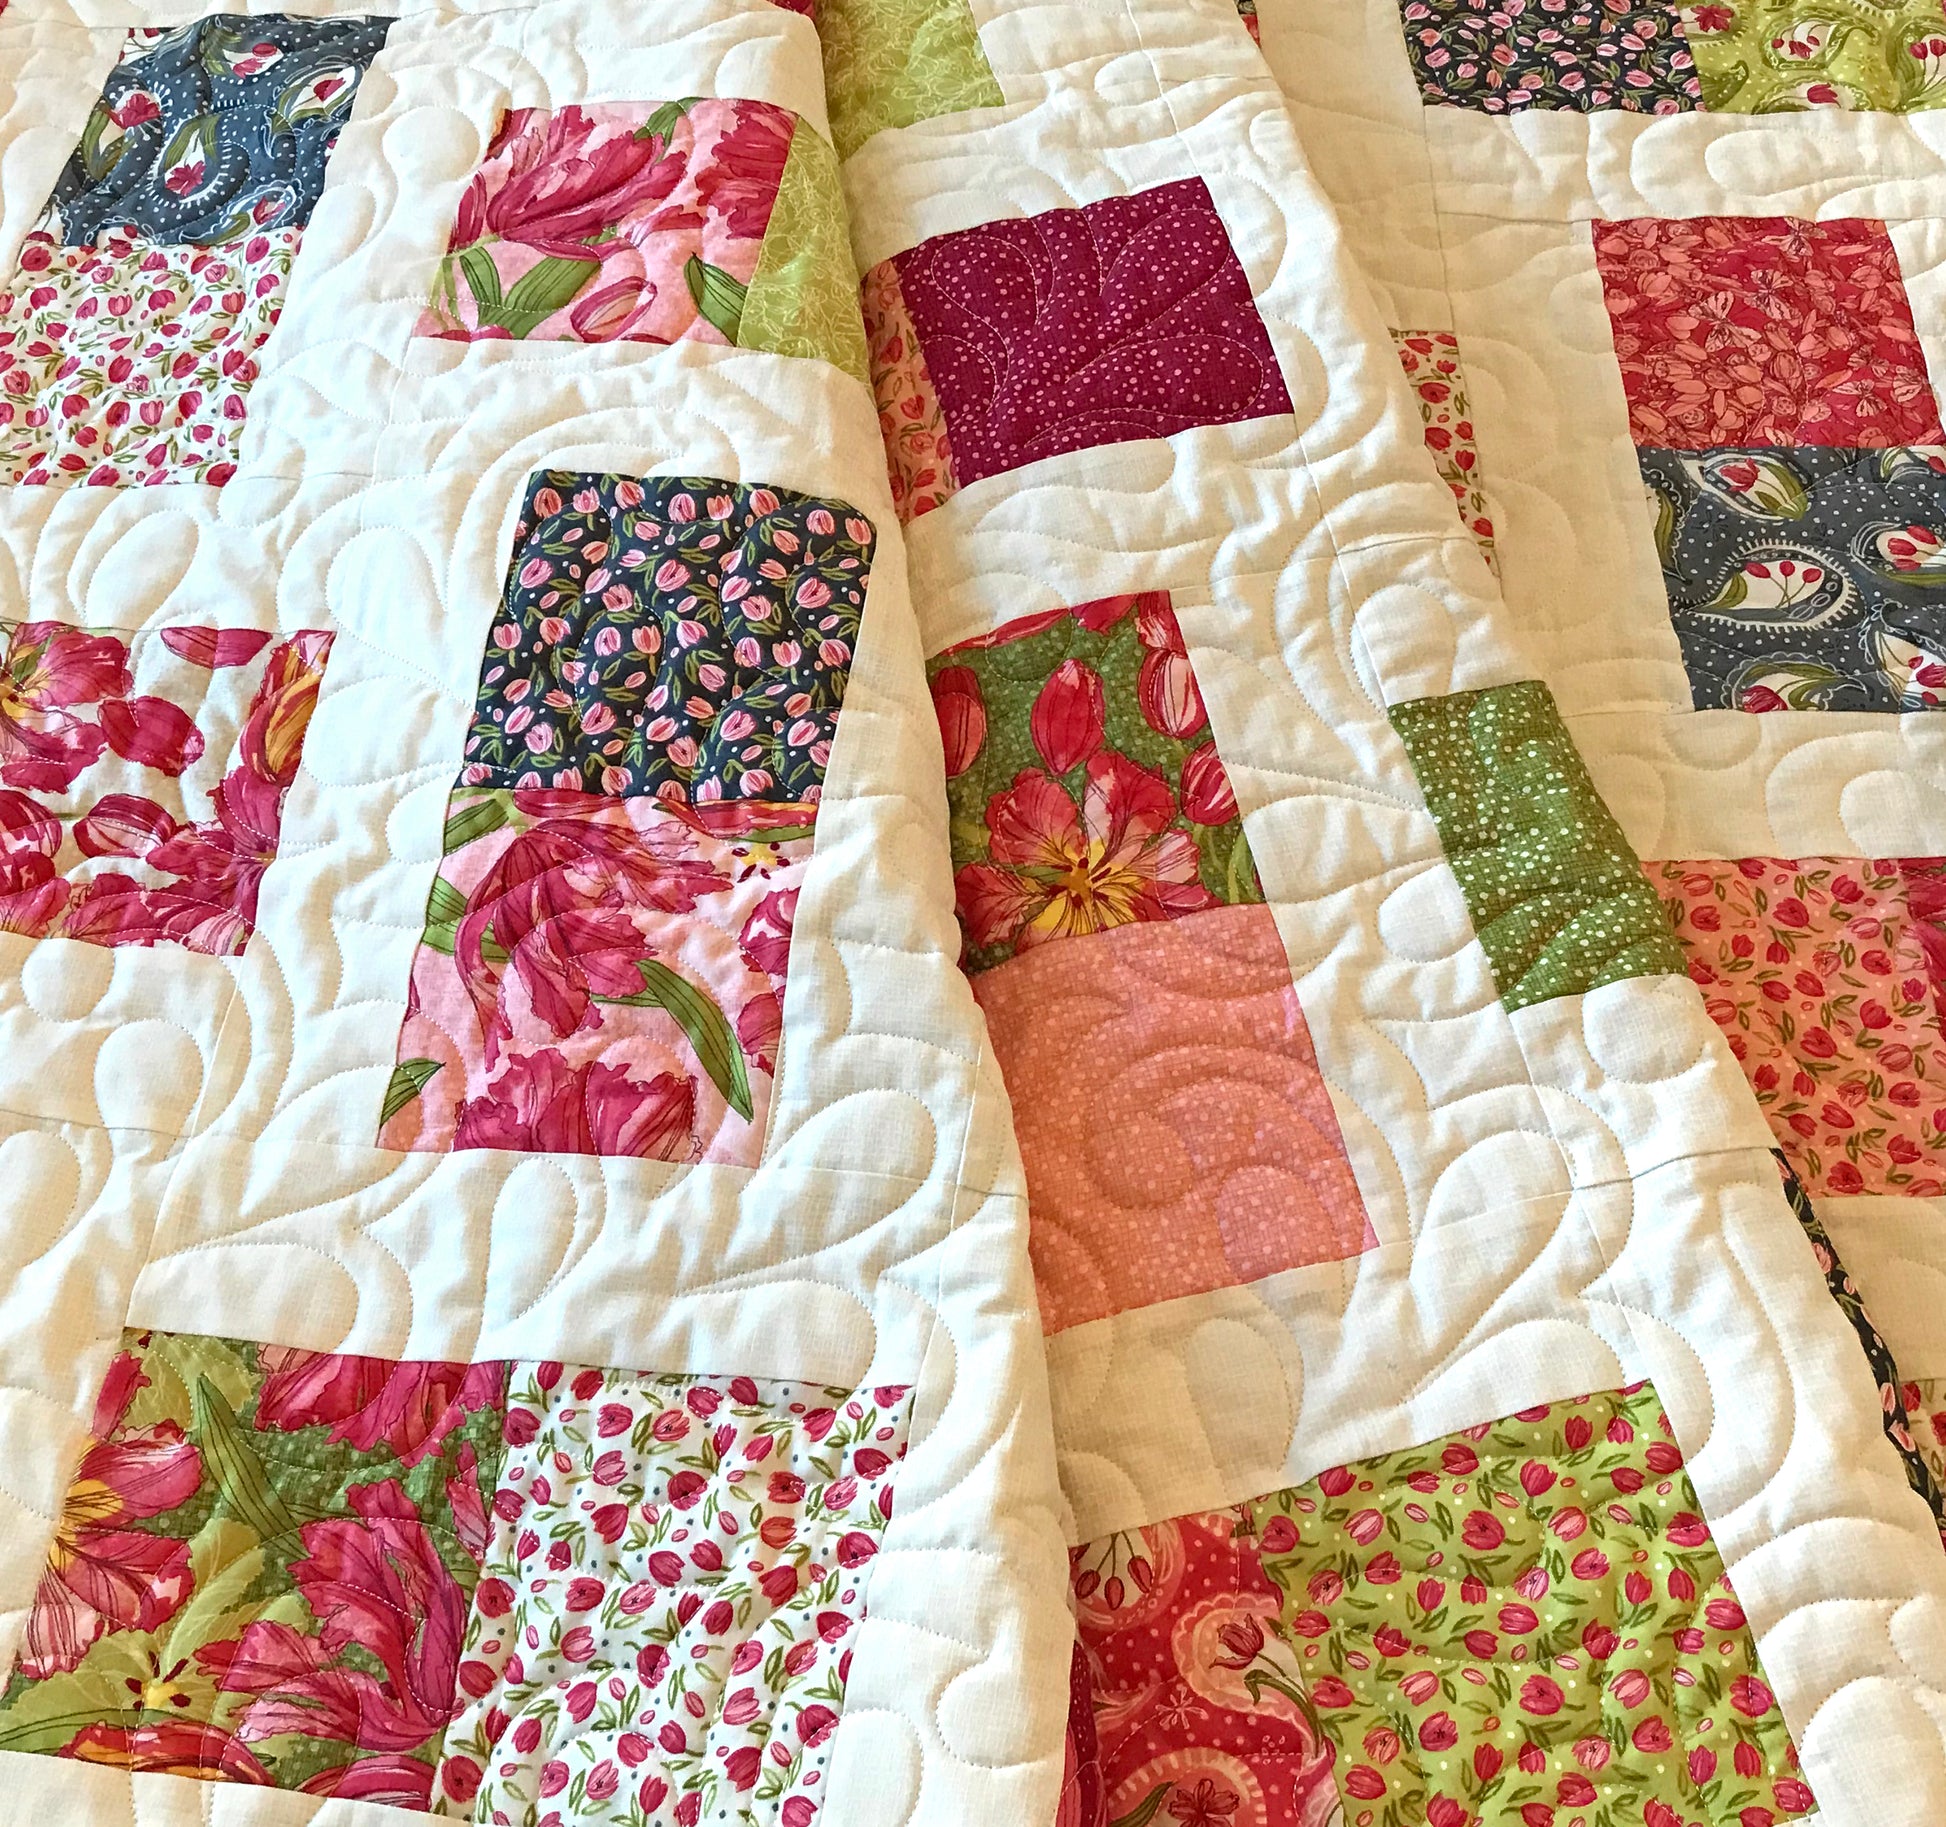 Pink Green and White Floral Patchwork Quilt - Handmade Quilts, Digital Patterns, and Home Décor items online - Cuddle Cat Quiltworks